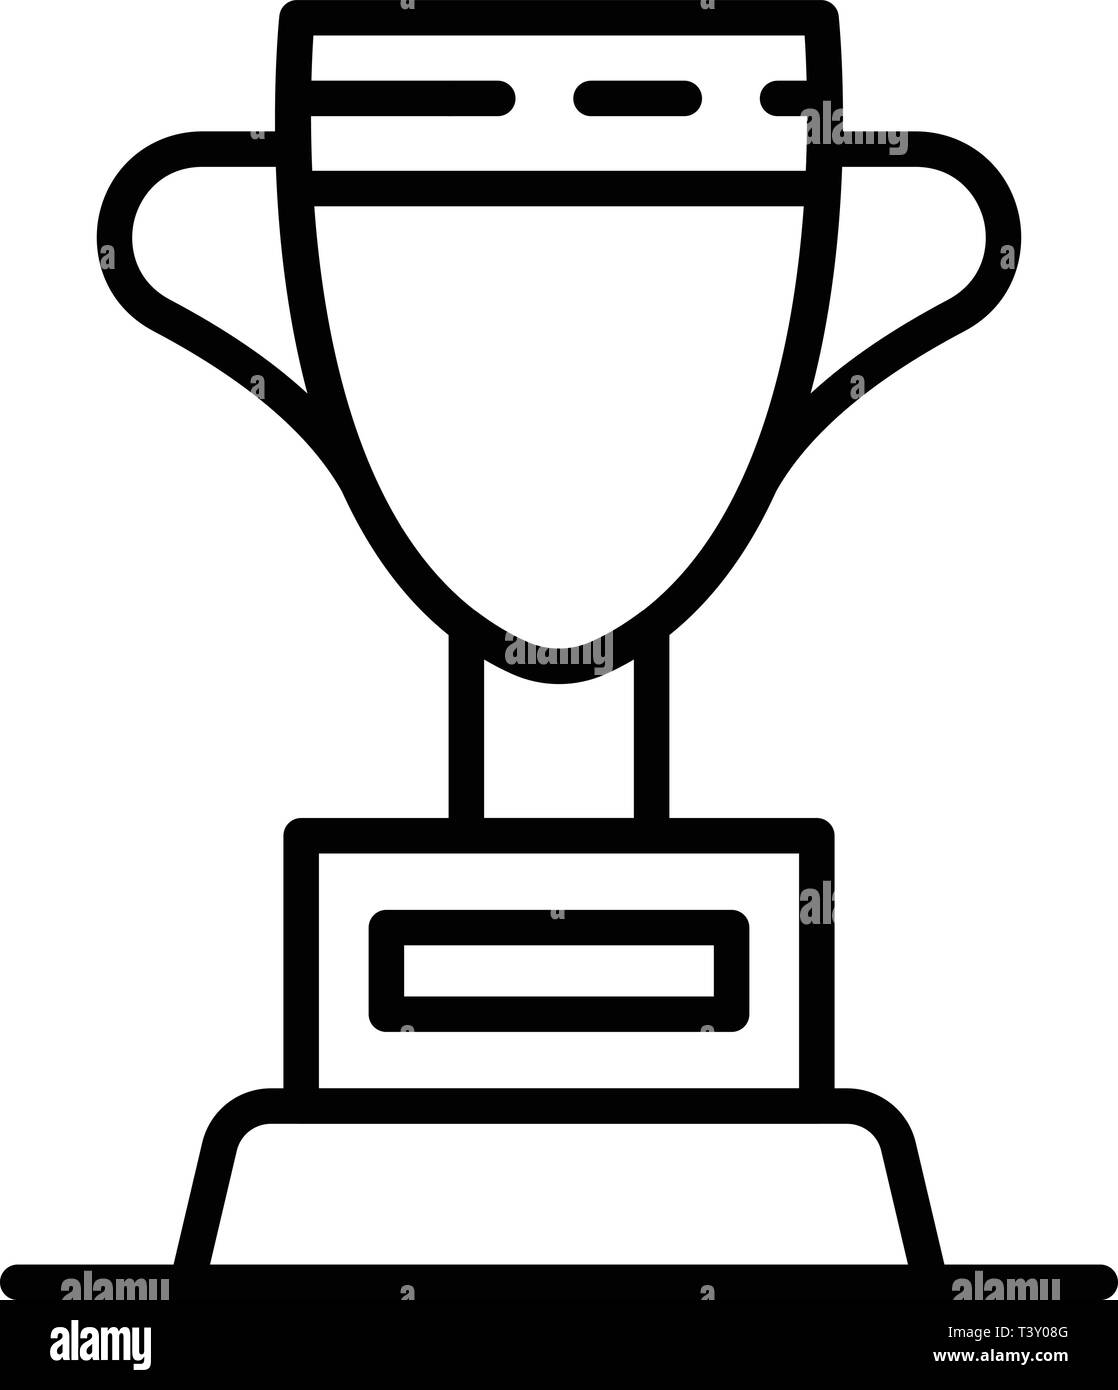 Basketball Cup Trophy Icon Stock Vector by ©iconfinder 469742342